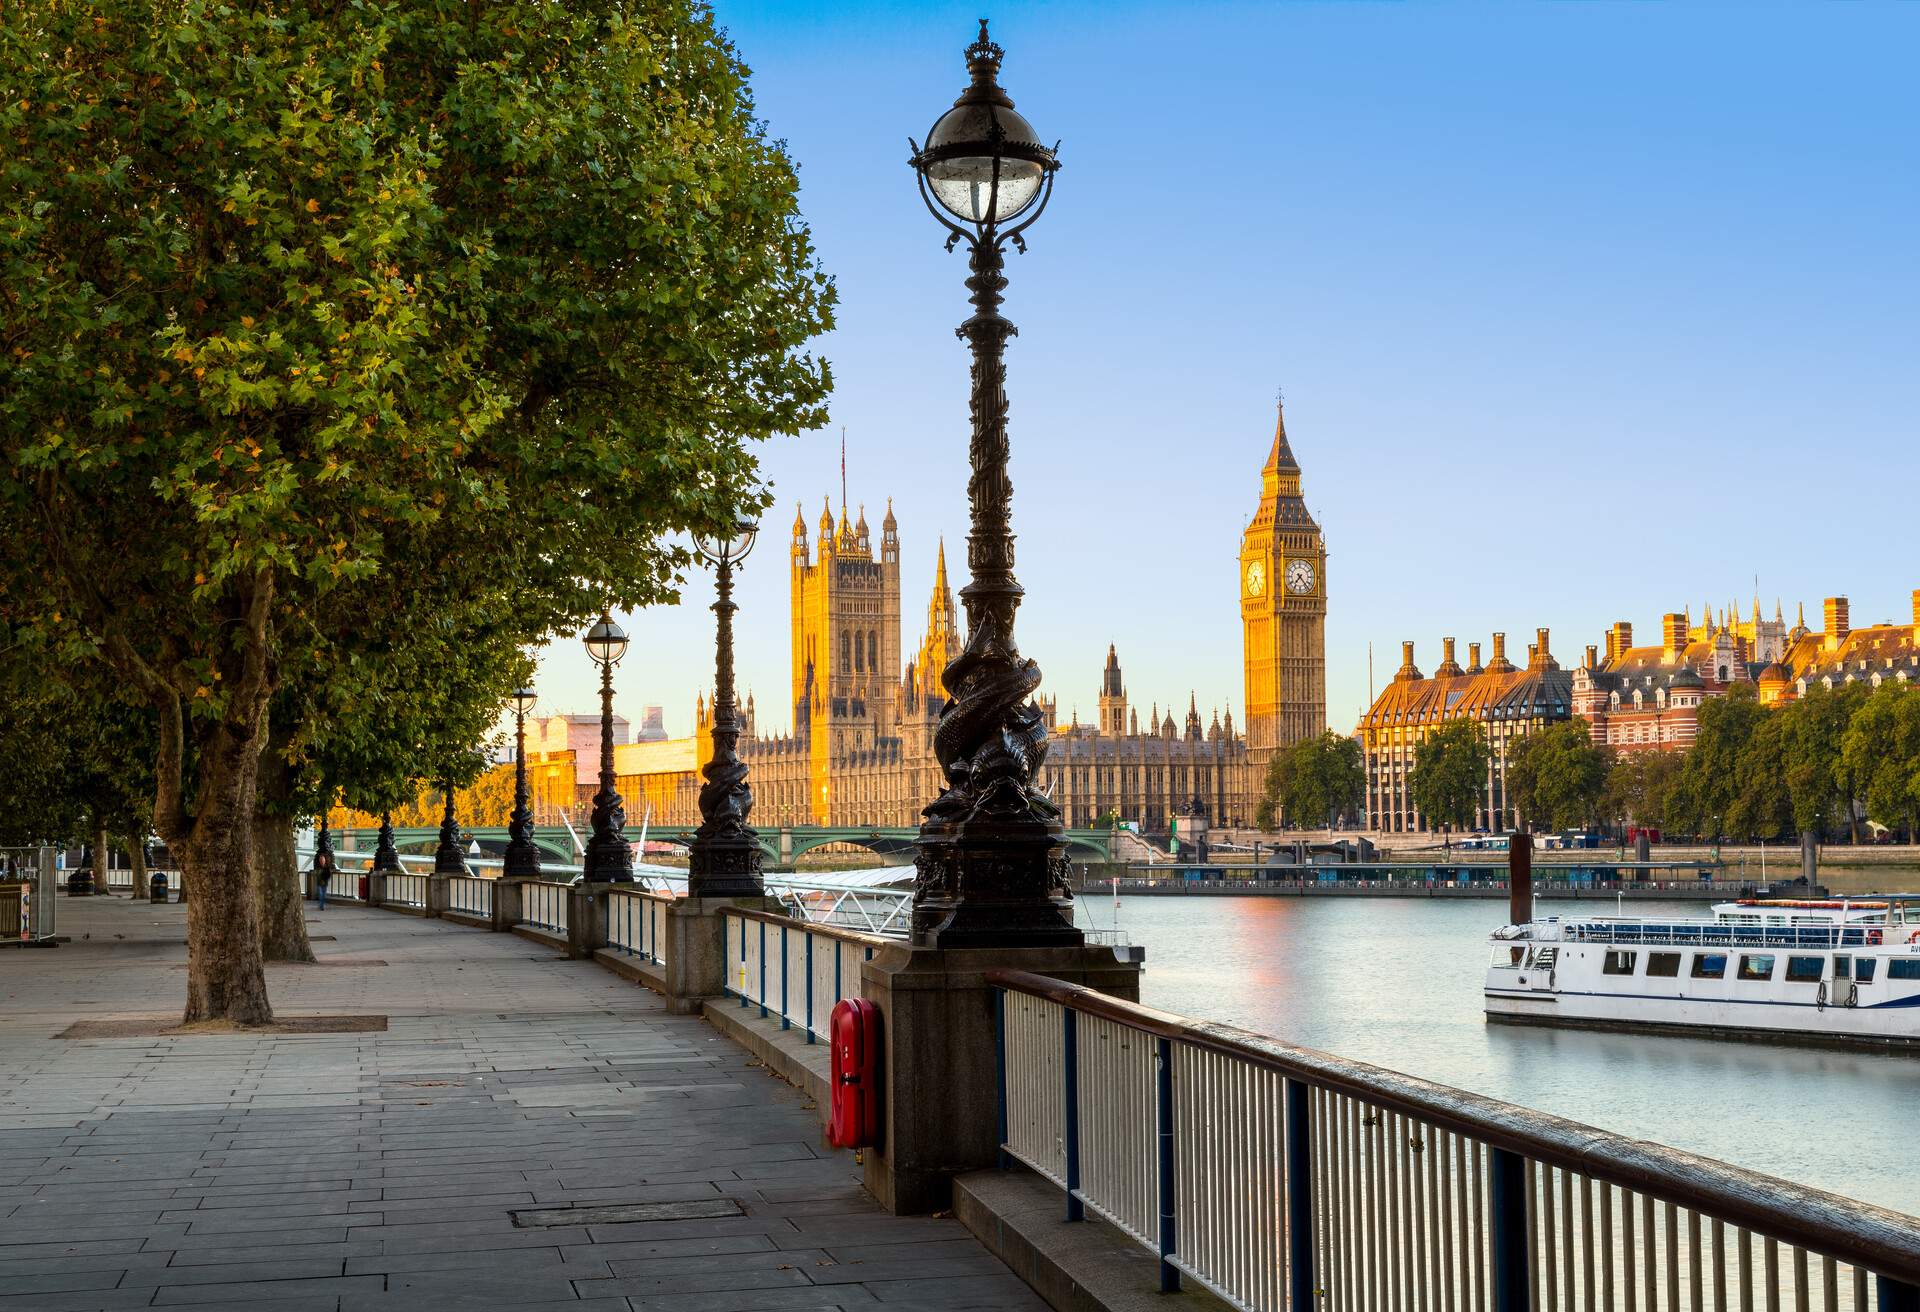 A tree-lined promenade along the River Thames, with the Big Ben in the backdrop.